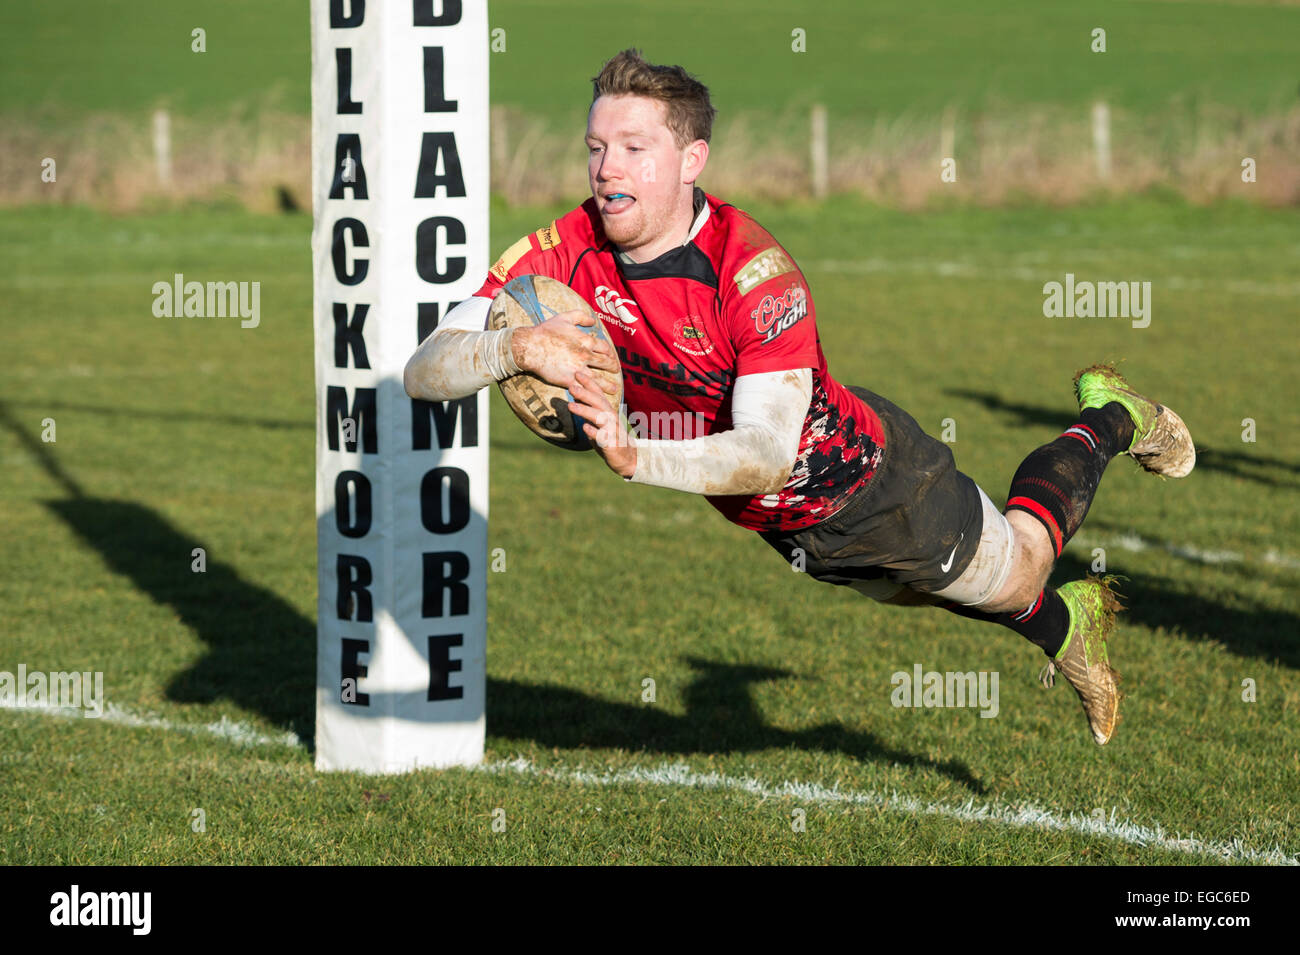 Rugby player scoring try. Stock Photo